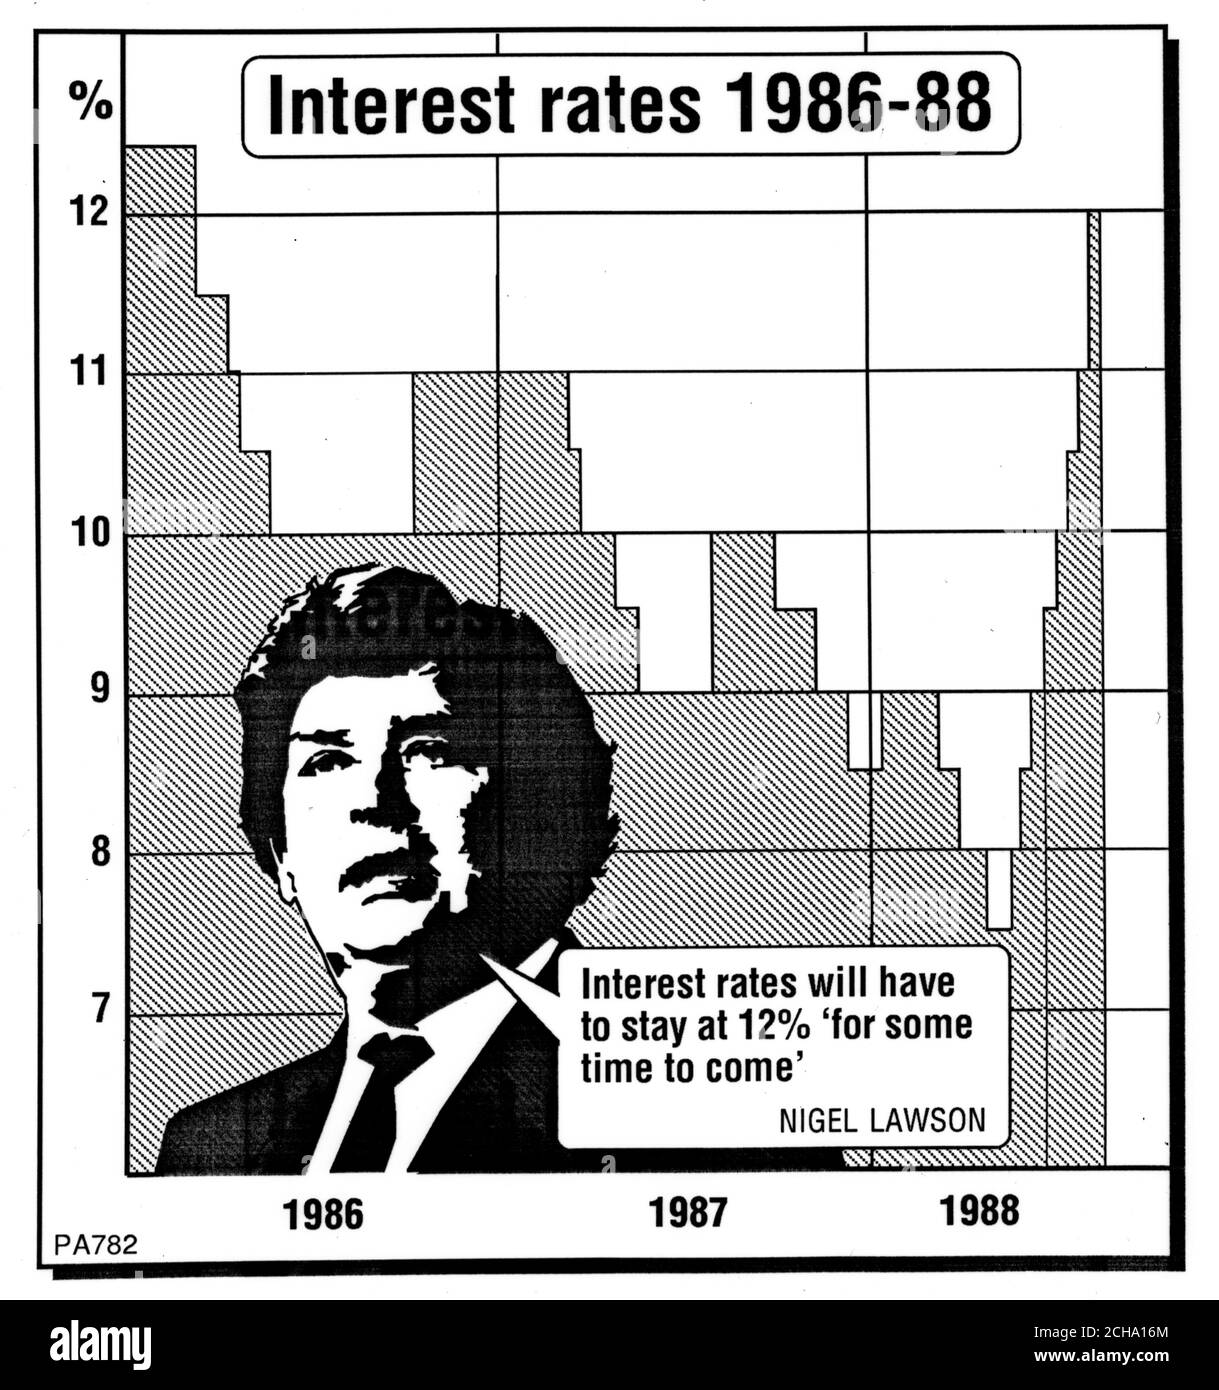 PA Graphic showing the rise and fall of interest rates during the years 1986-1988. Stock Photo